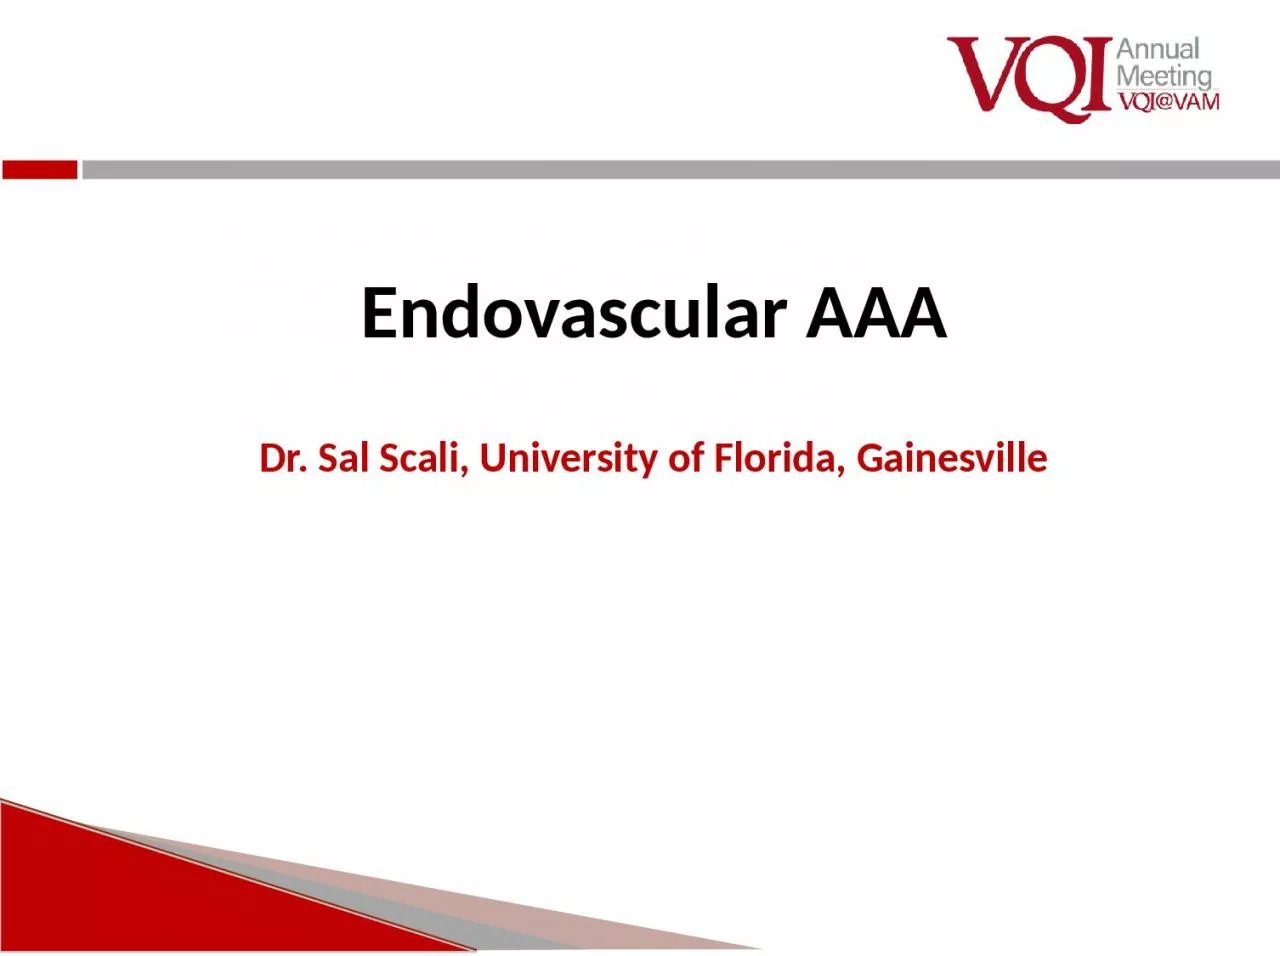 Endovascular AAA Dr. Sal Scali, University of Florida, Gainesville